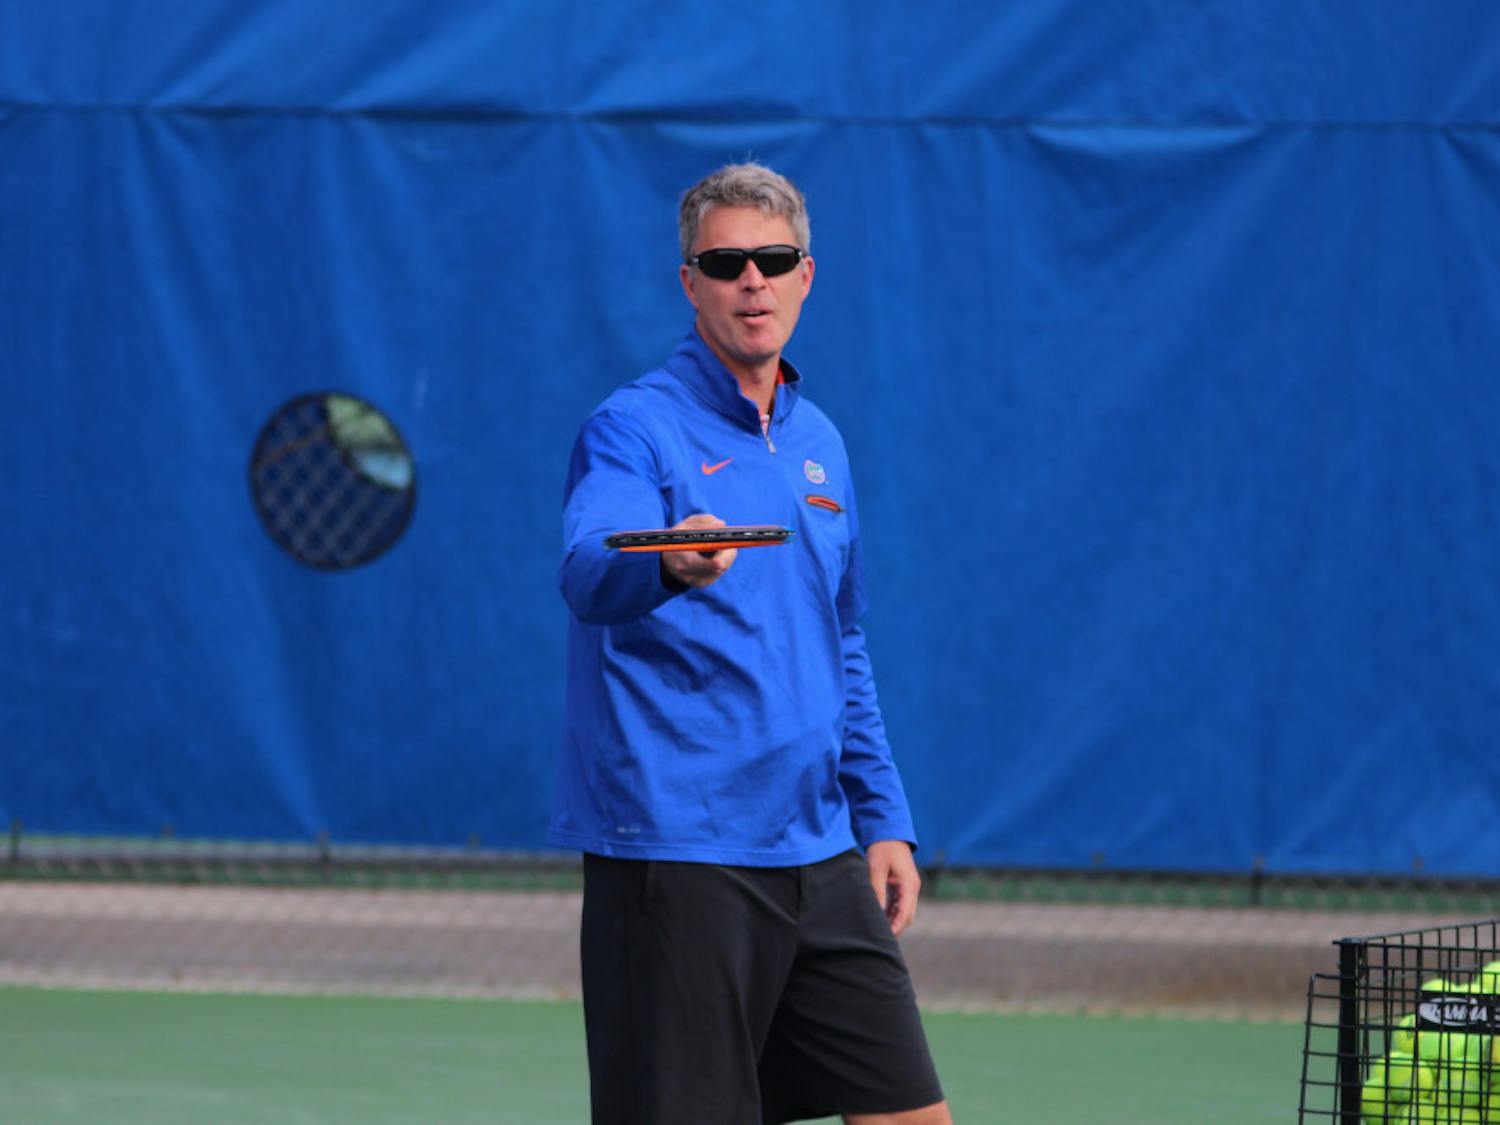 Coach Roland Thornqvist and the Gators are wrapping up their regular season with three final conference matchups. "These last two weekends are going to provide some of the most exciting tennis and marquee match-ups,” he said. 